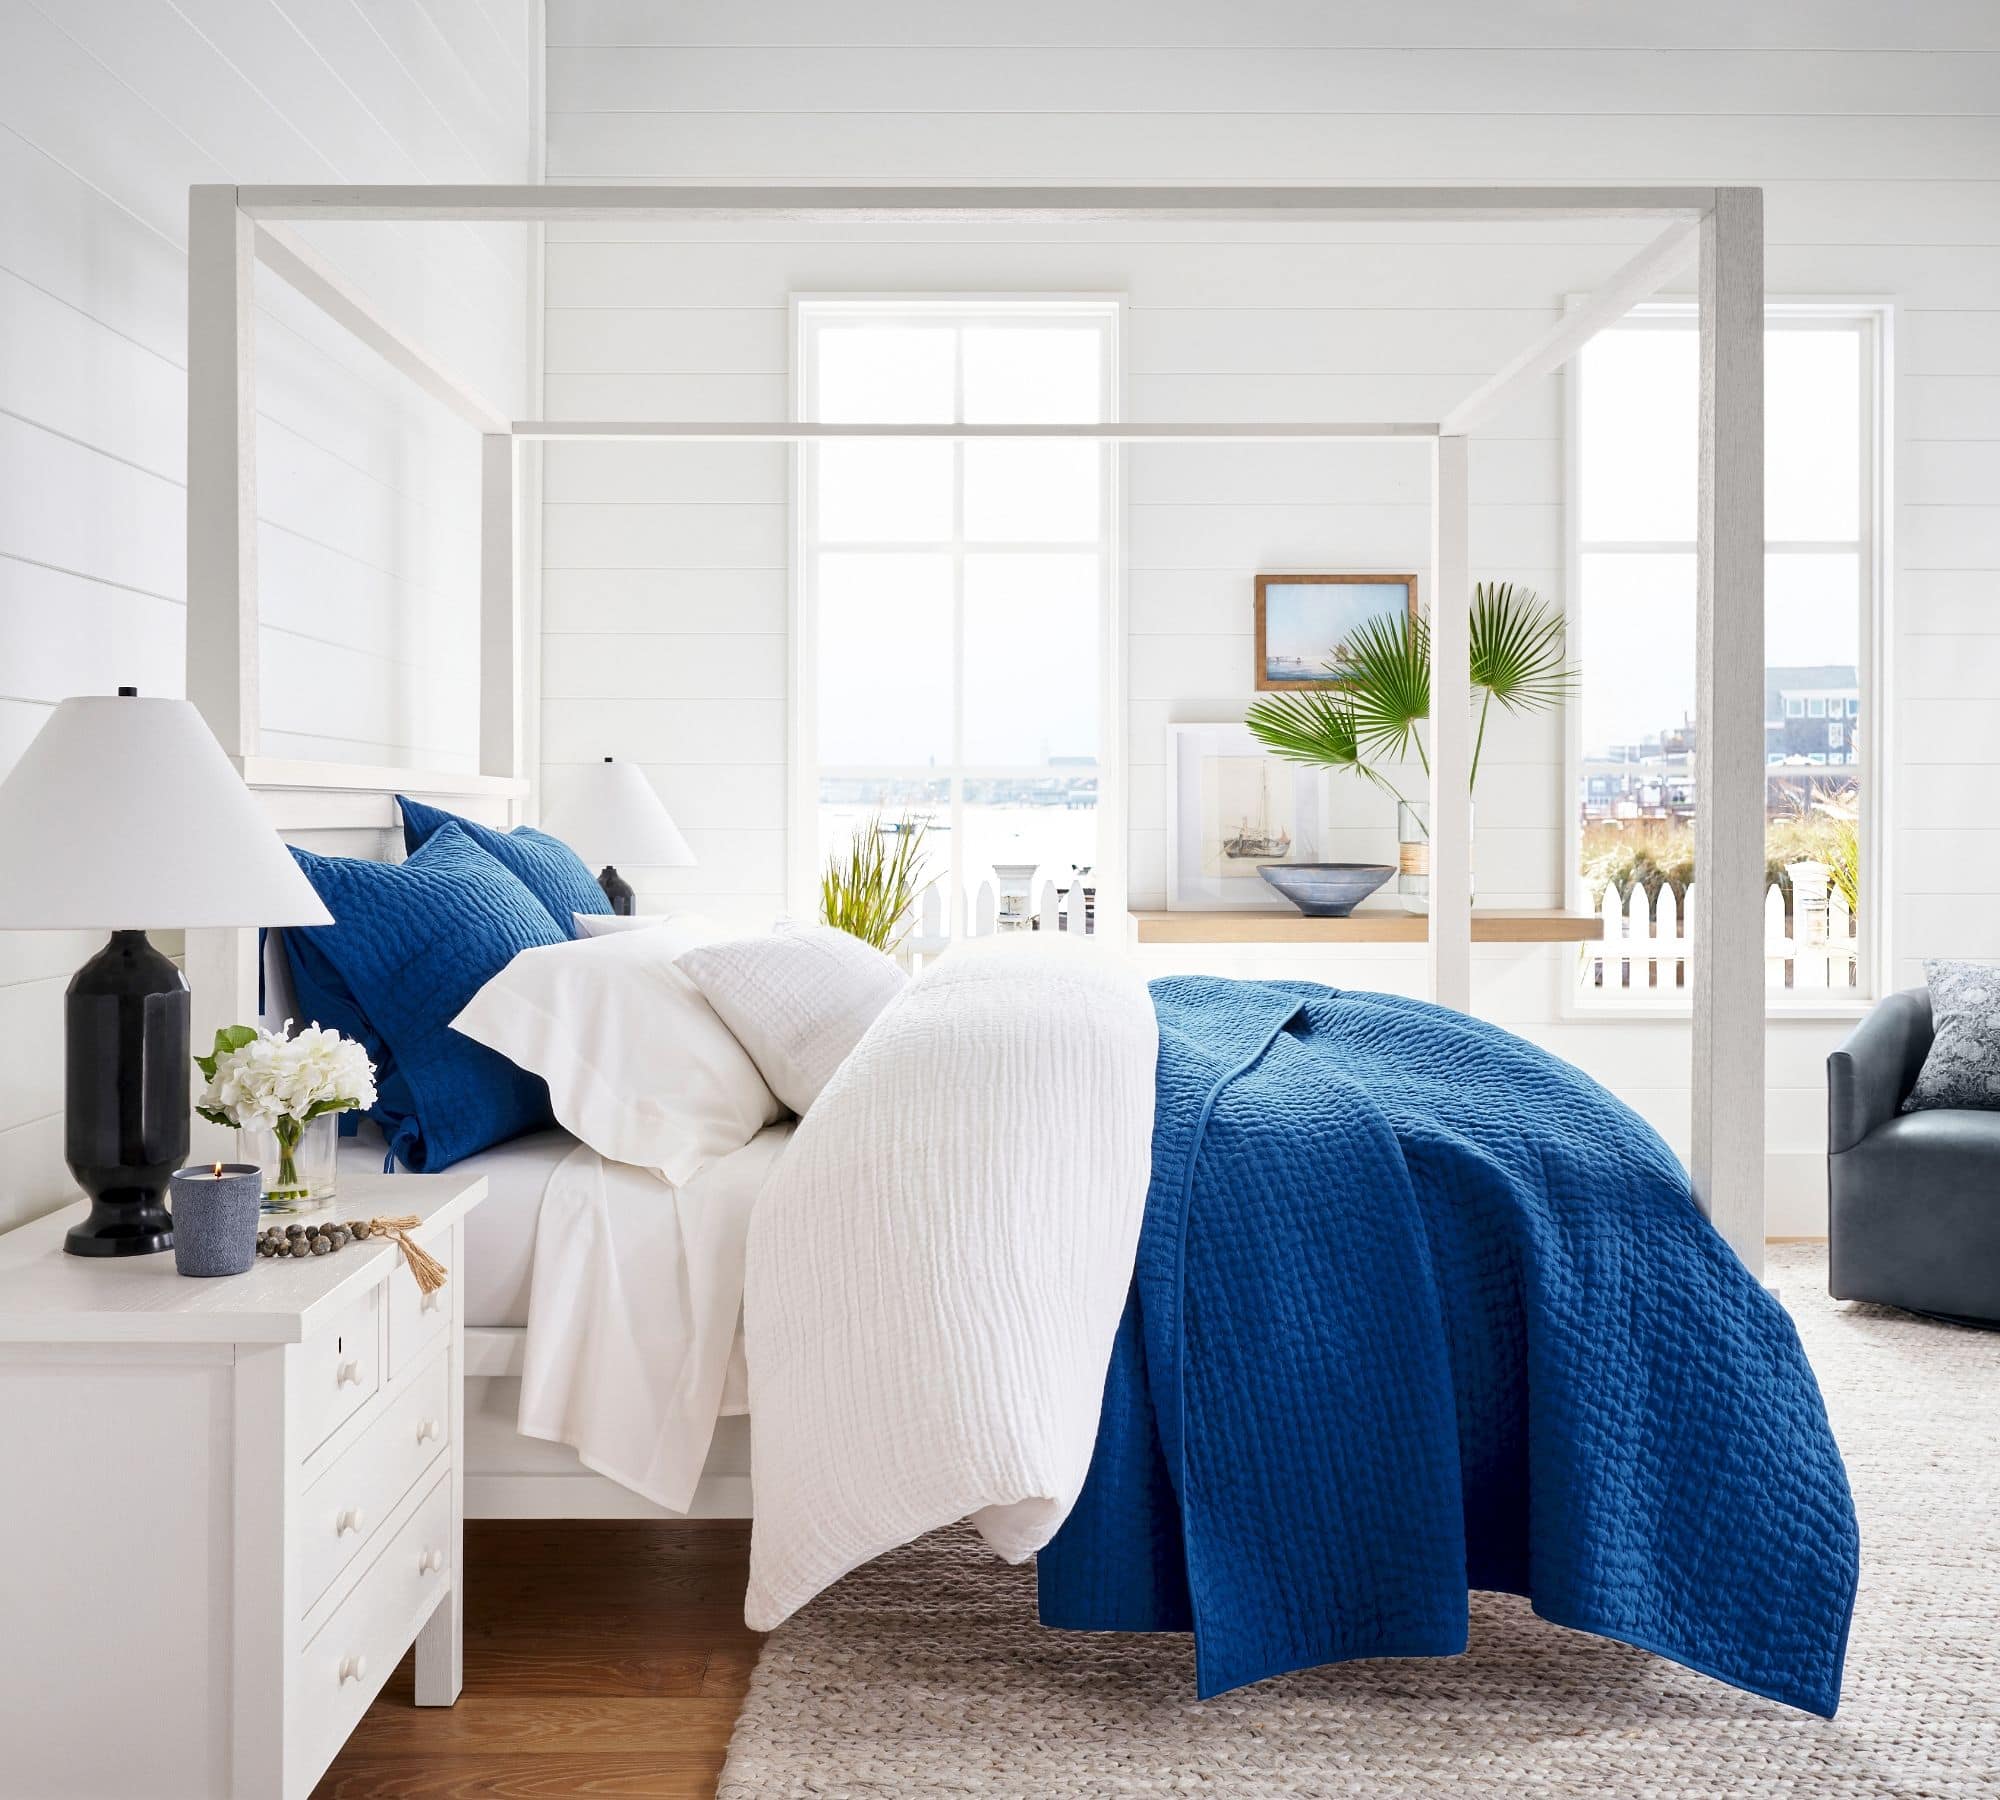 Bright blue coverlet and matching pillows with all white bedding. white furniture and a sisal rug